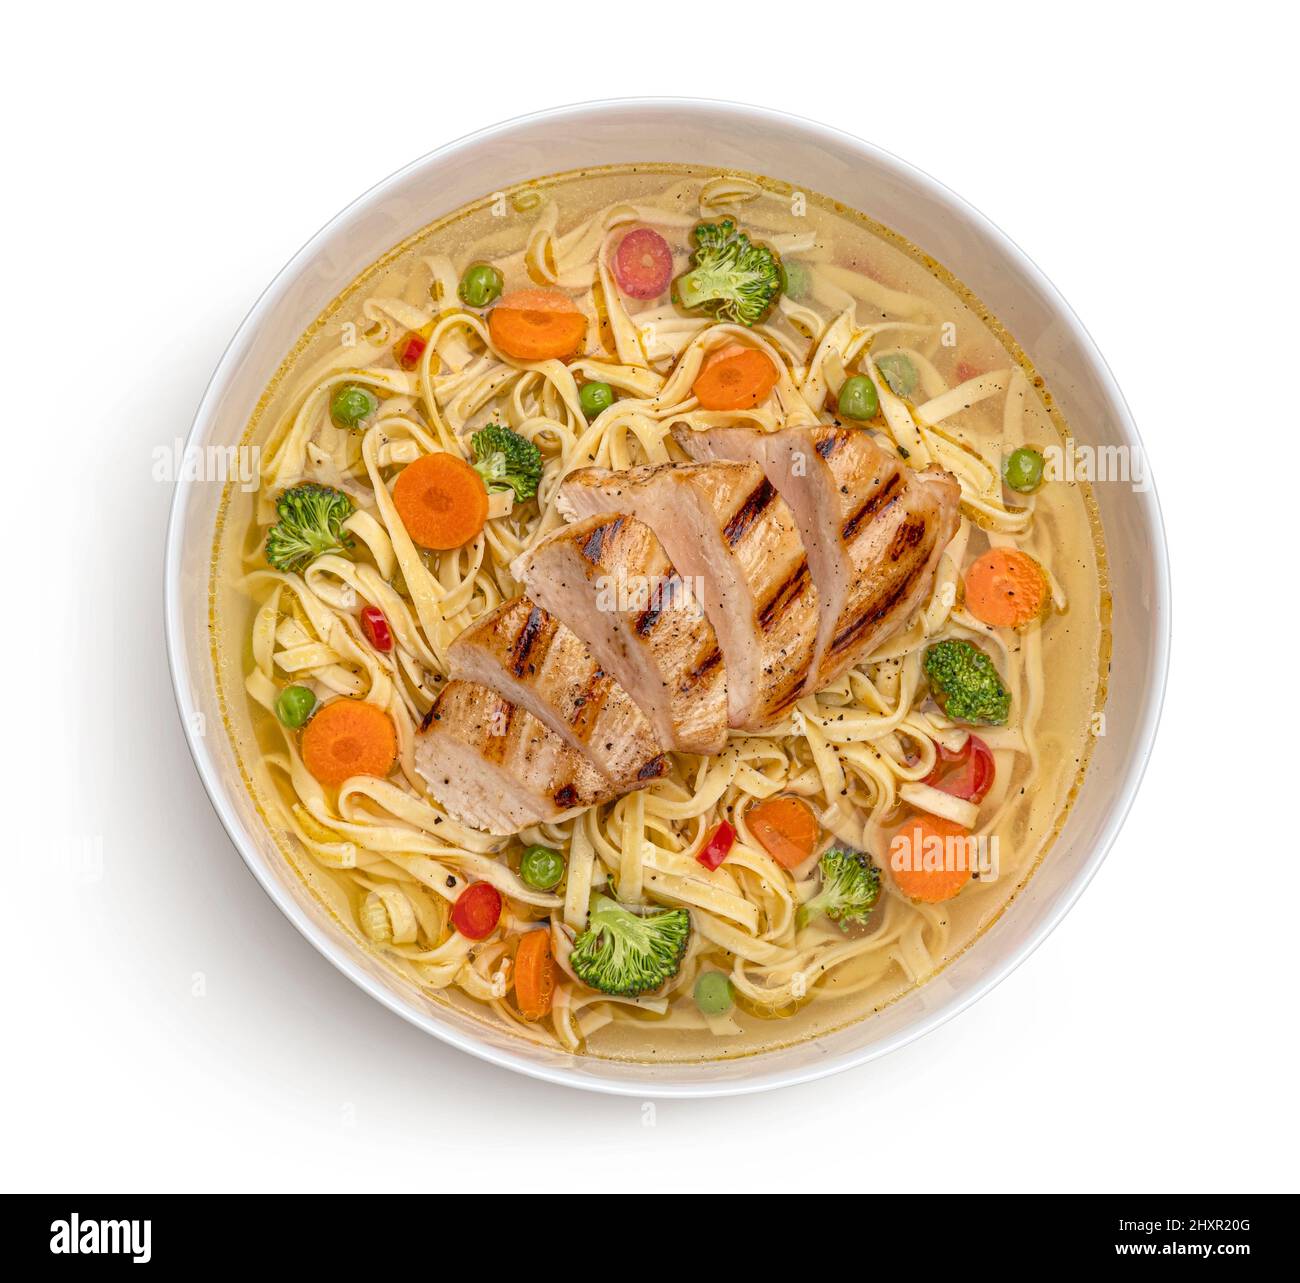 Udon noodles with grilled chicken, instant soup with vegetables Stock Photo